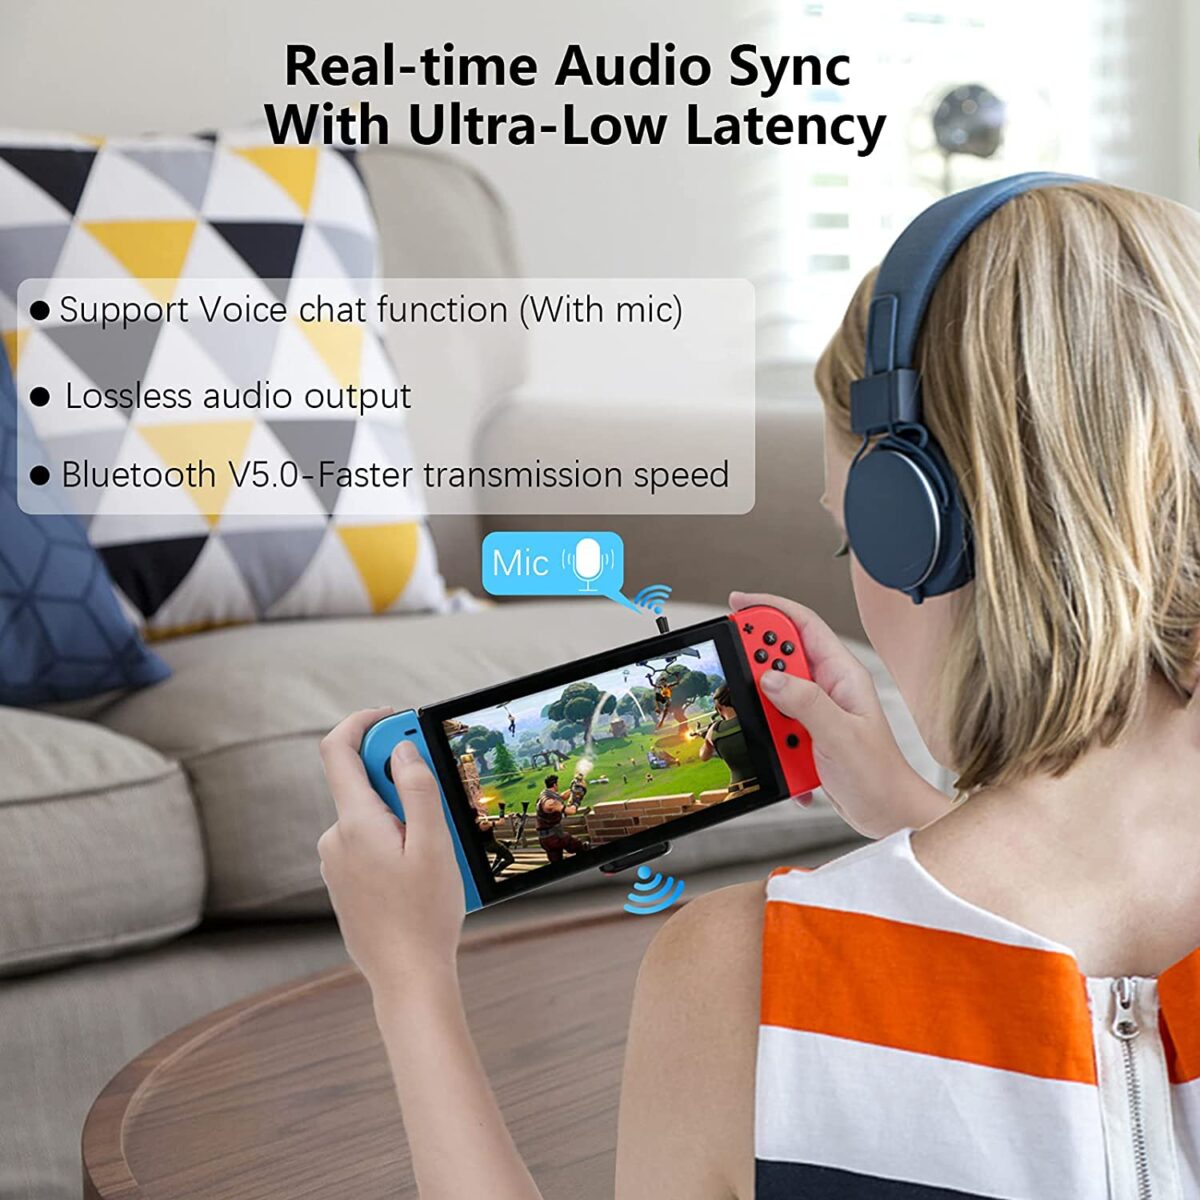 Wireless Bluetooth Adapter Mic Supports in-Game Voice Chat, Wireless Audio Transmitter with aptX Low Latency to Bluetooth Speaker/Earbuds/Headphones Compatible with Nintendo Switch/PS4/PS5/PC – Model: mimd-445